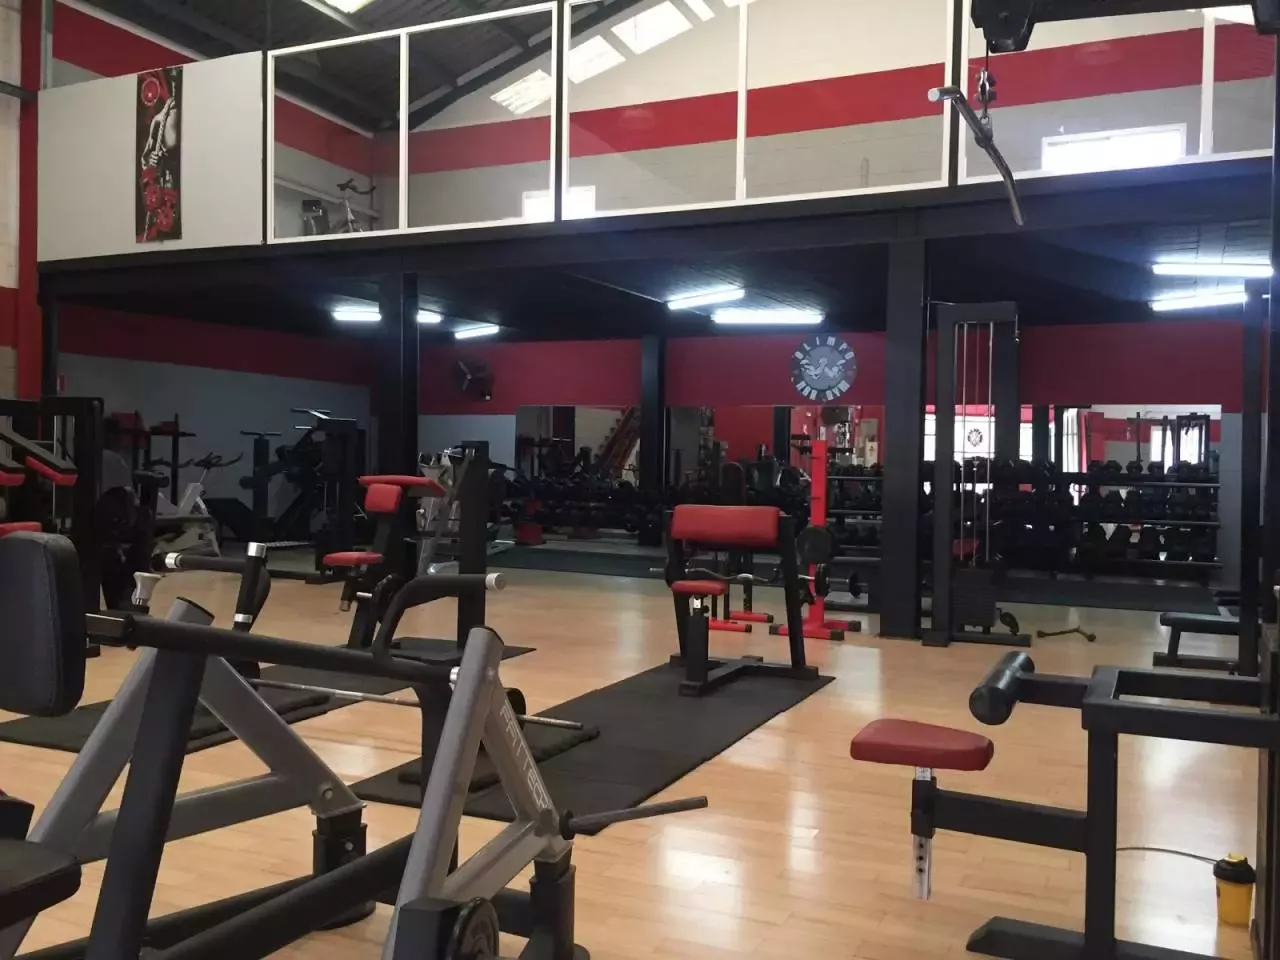 2. Olimpo Ngr Gym